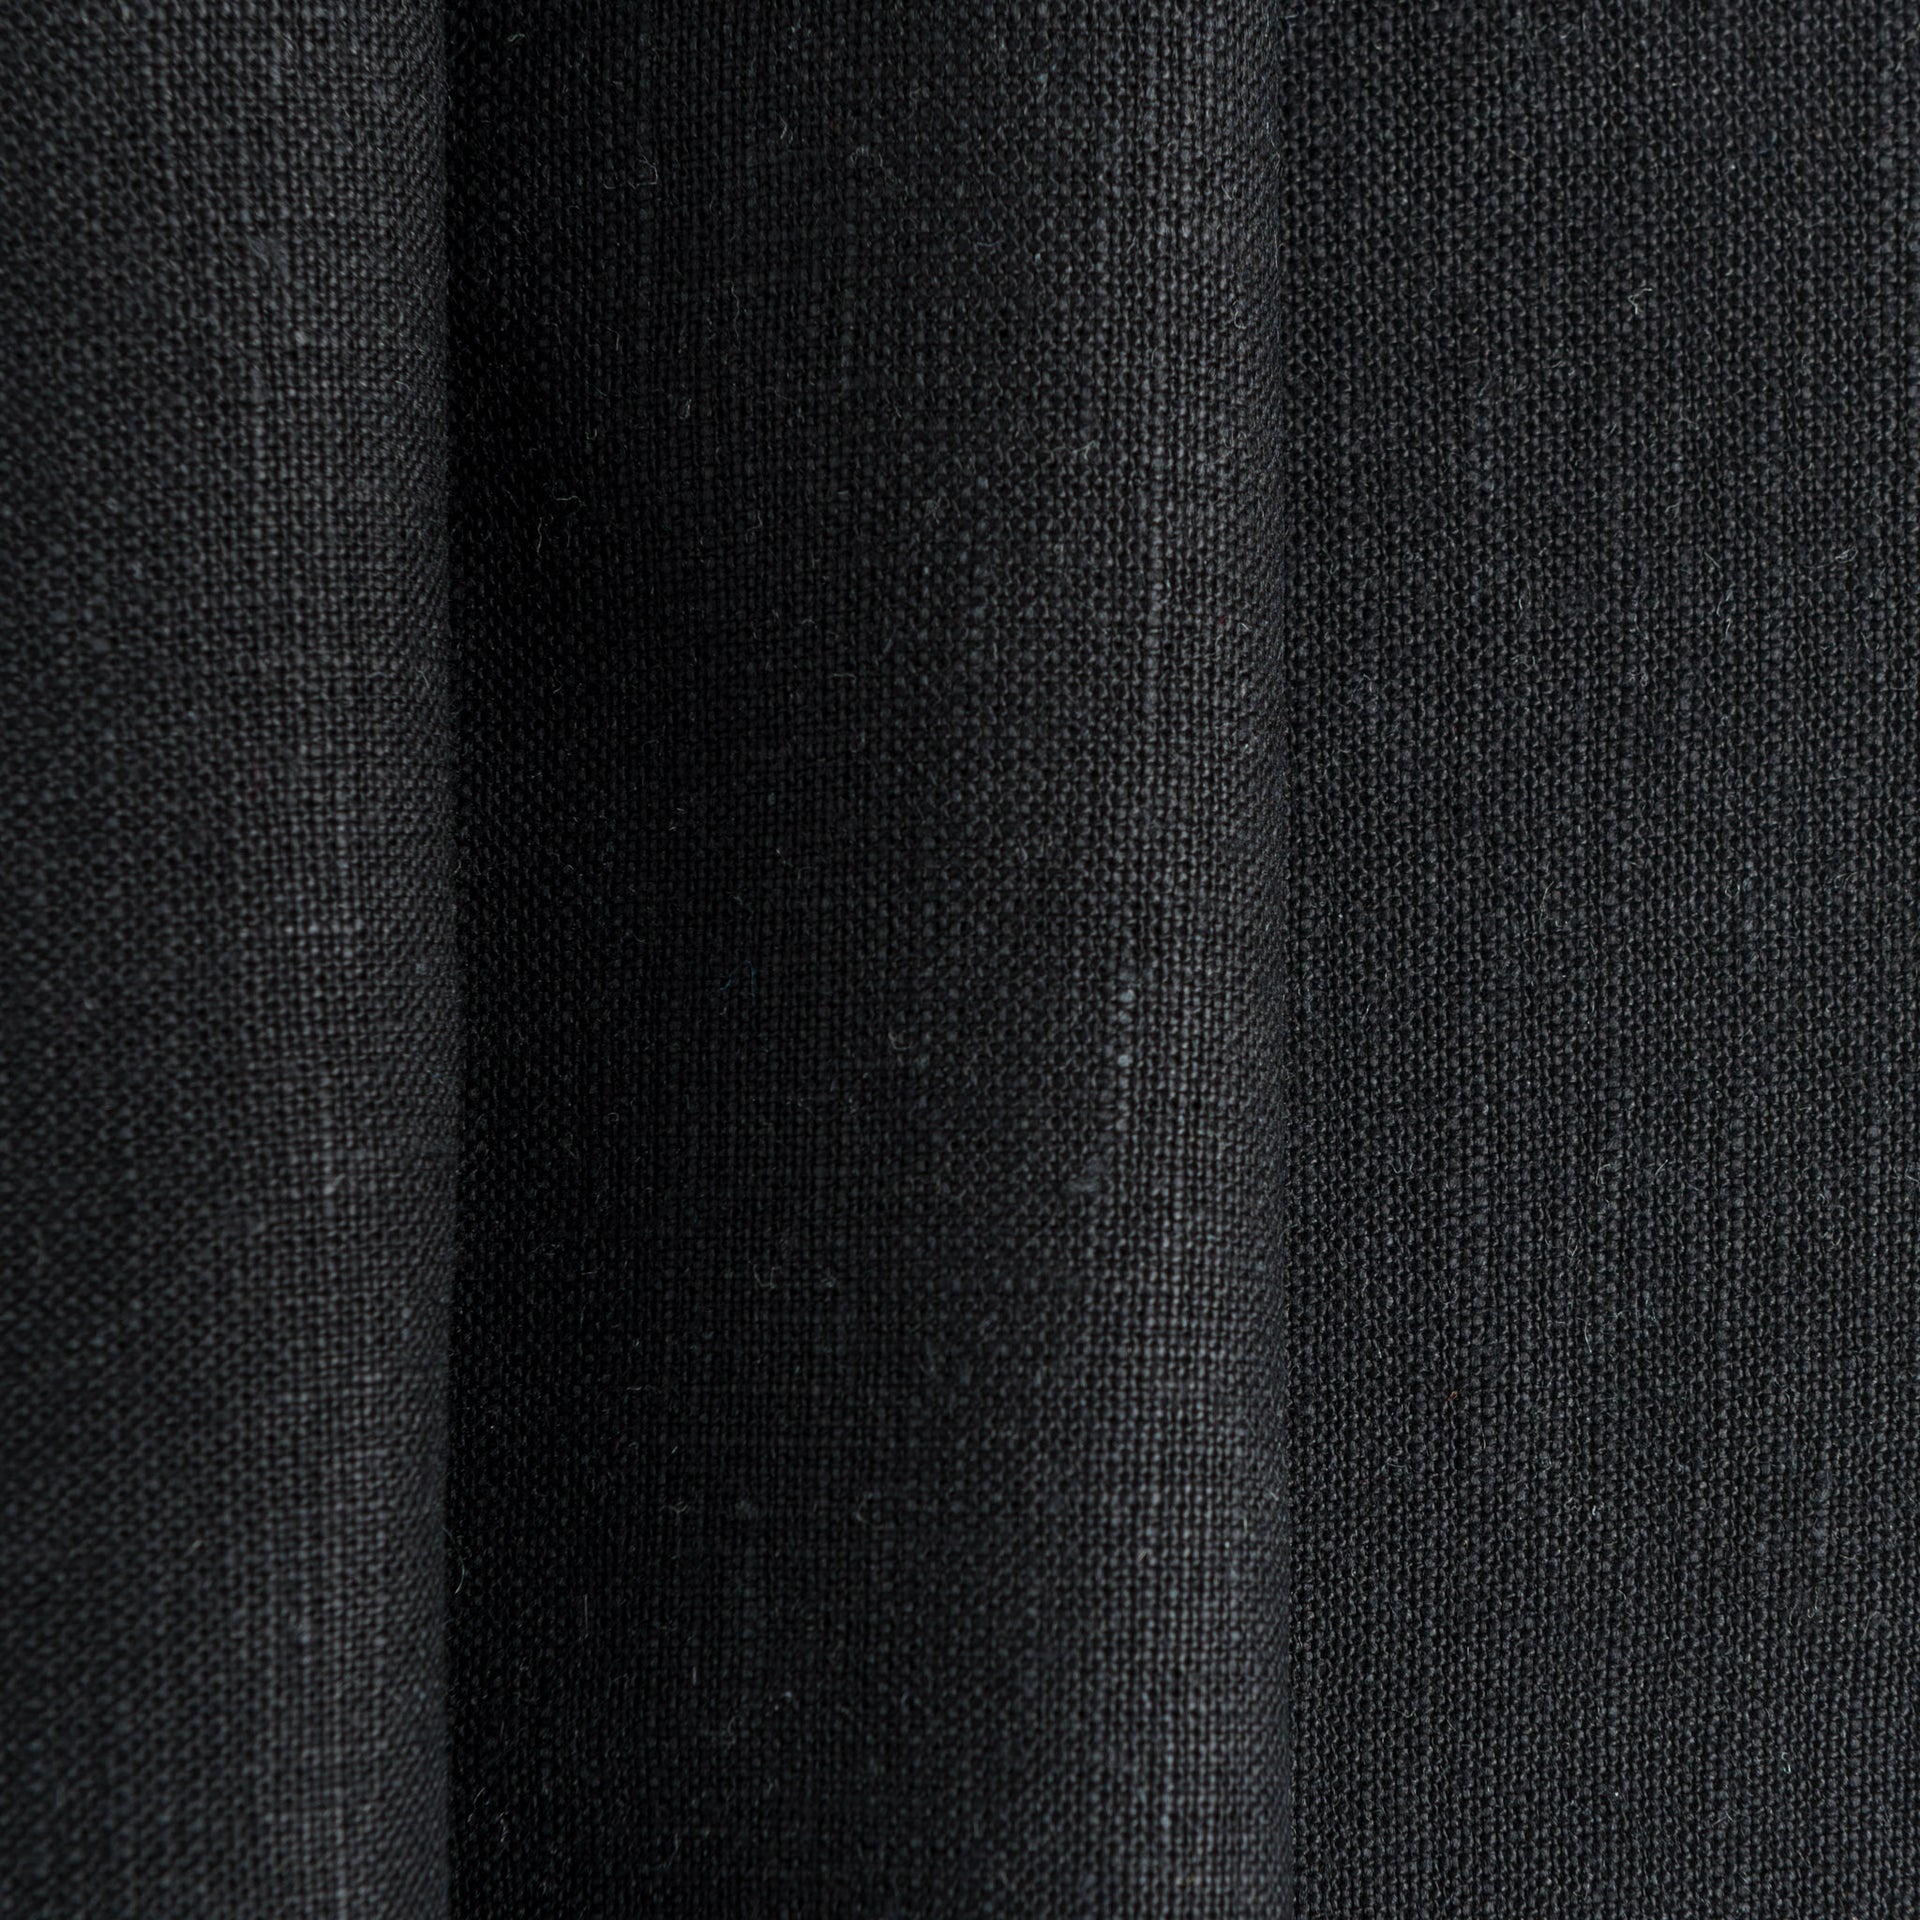 Black Linen Fabric by the Meter - 100% French Natural - Width 133 cm, 267 cm